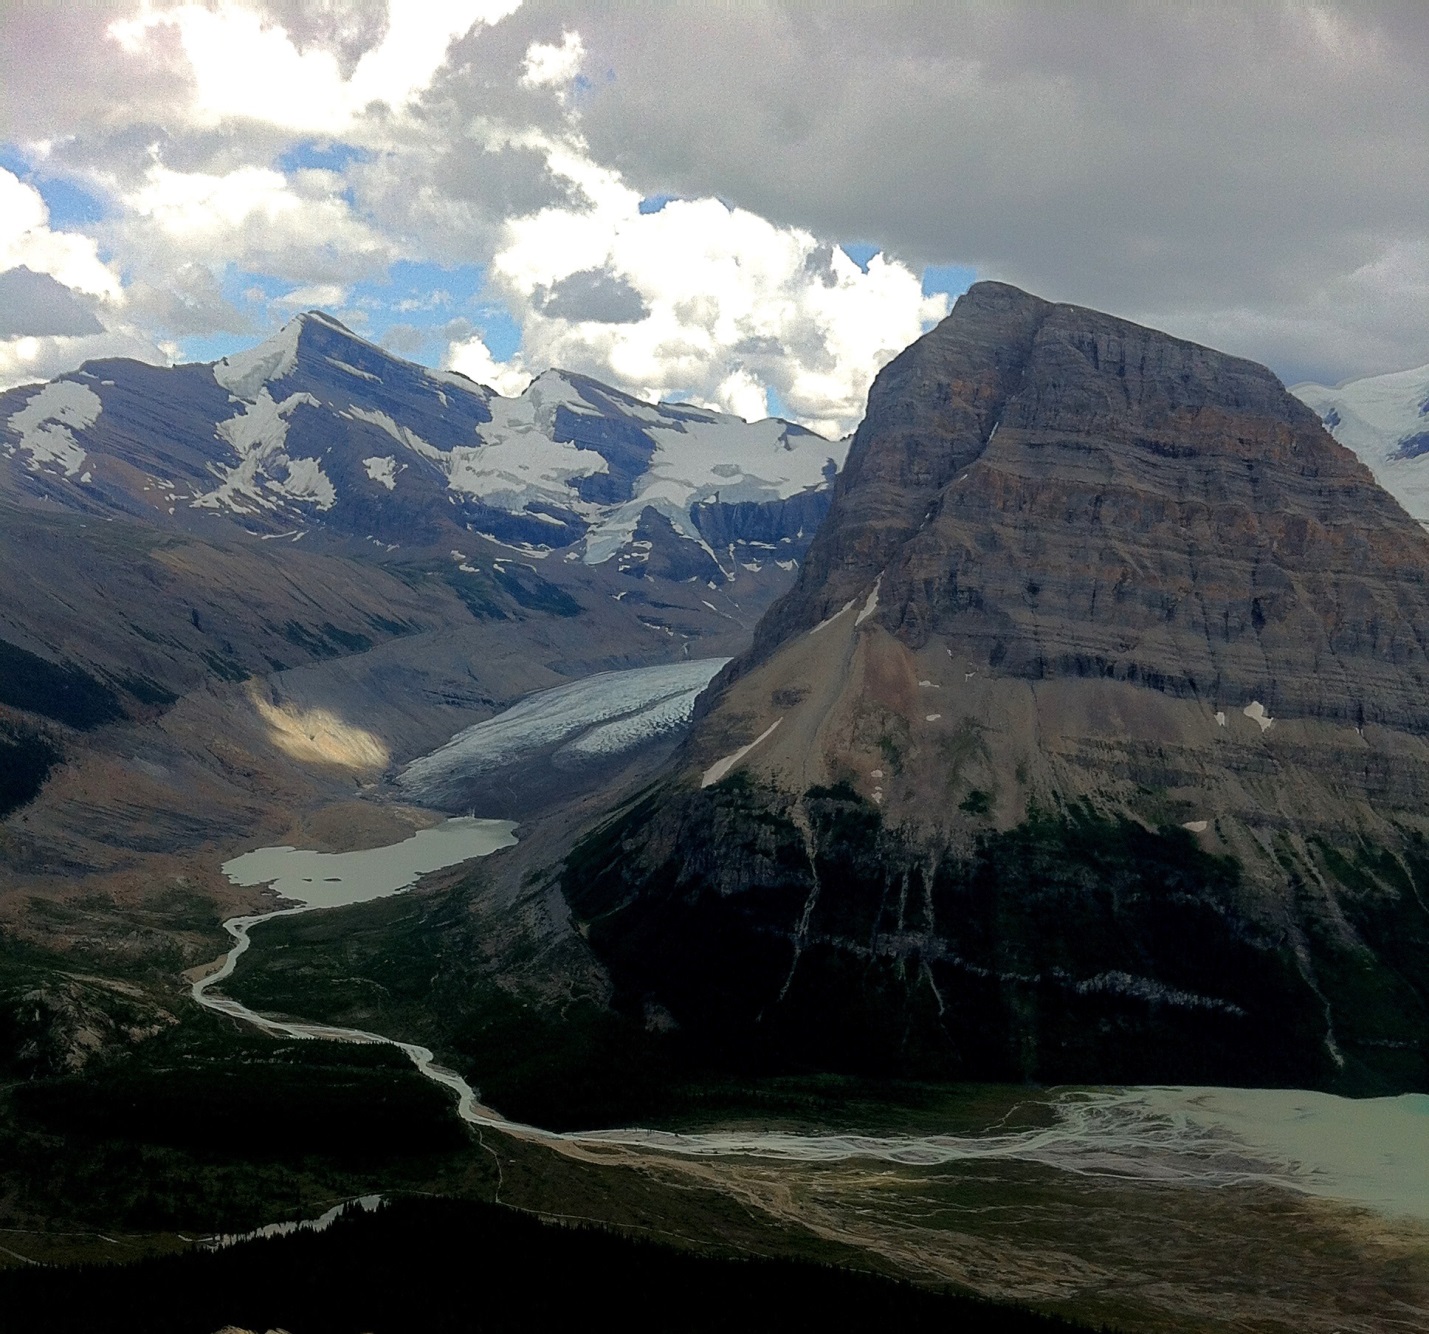 Photograph of Rearguard Mt. and Robson Glacier in the Rocky Mountains of British Columbia [SE]